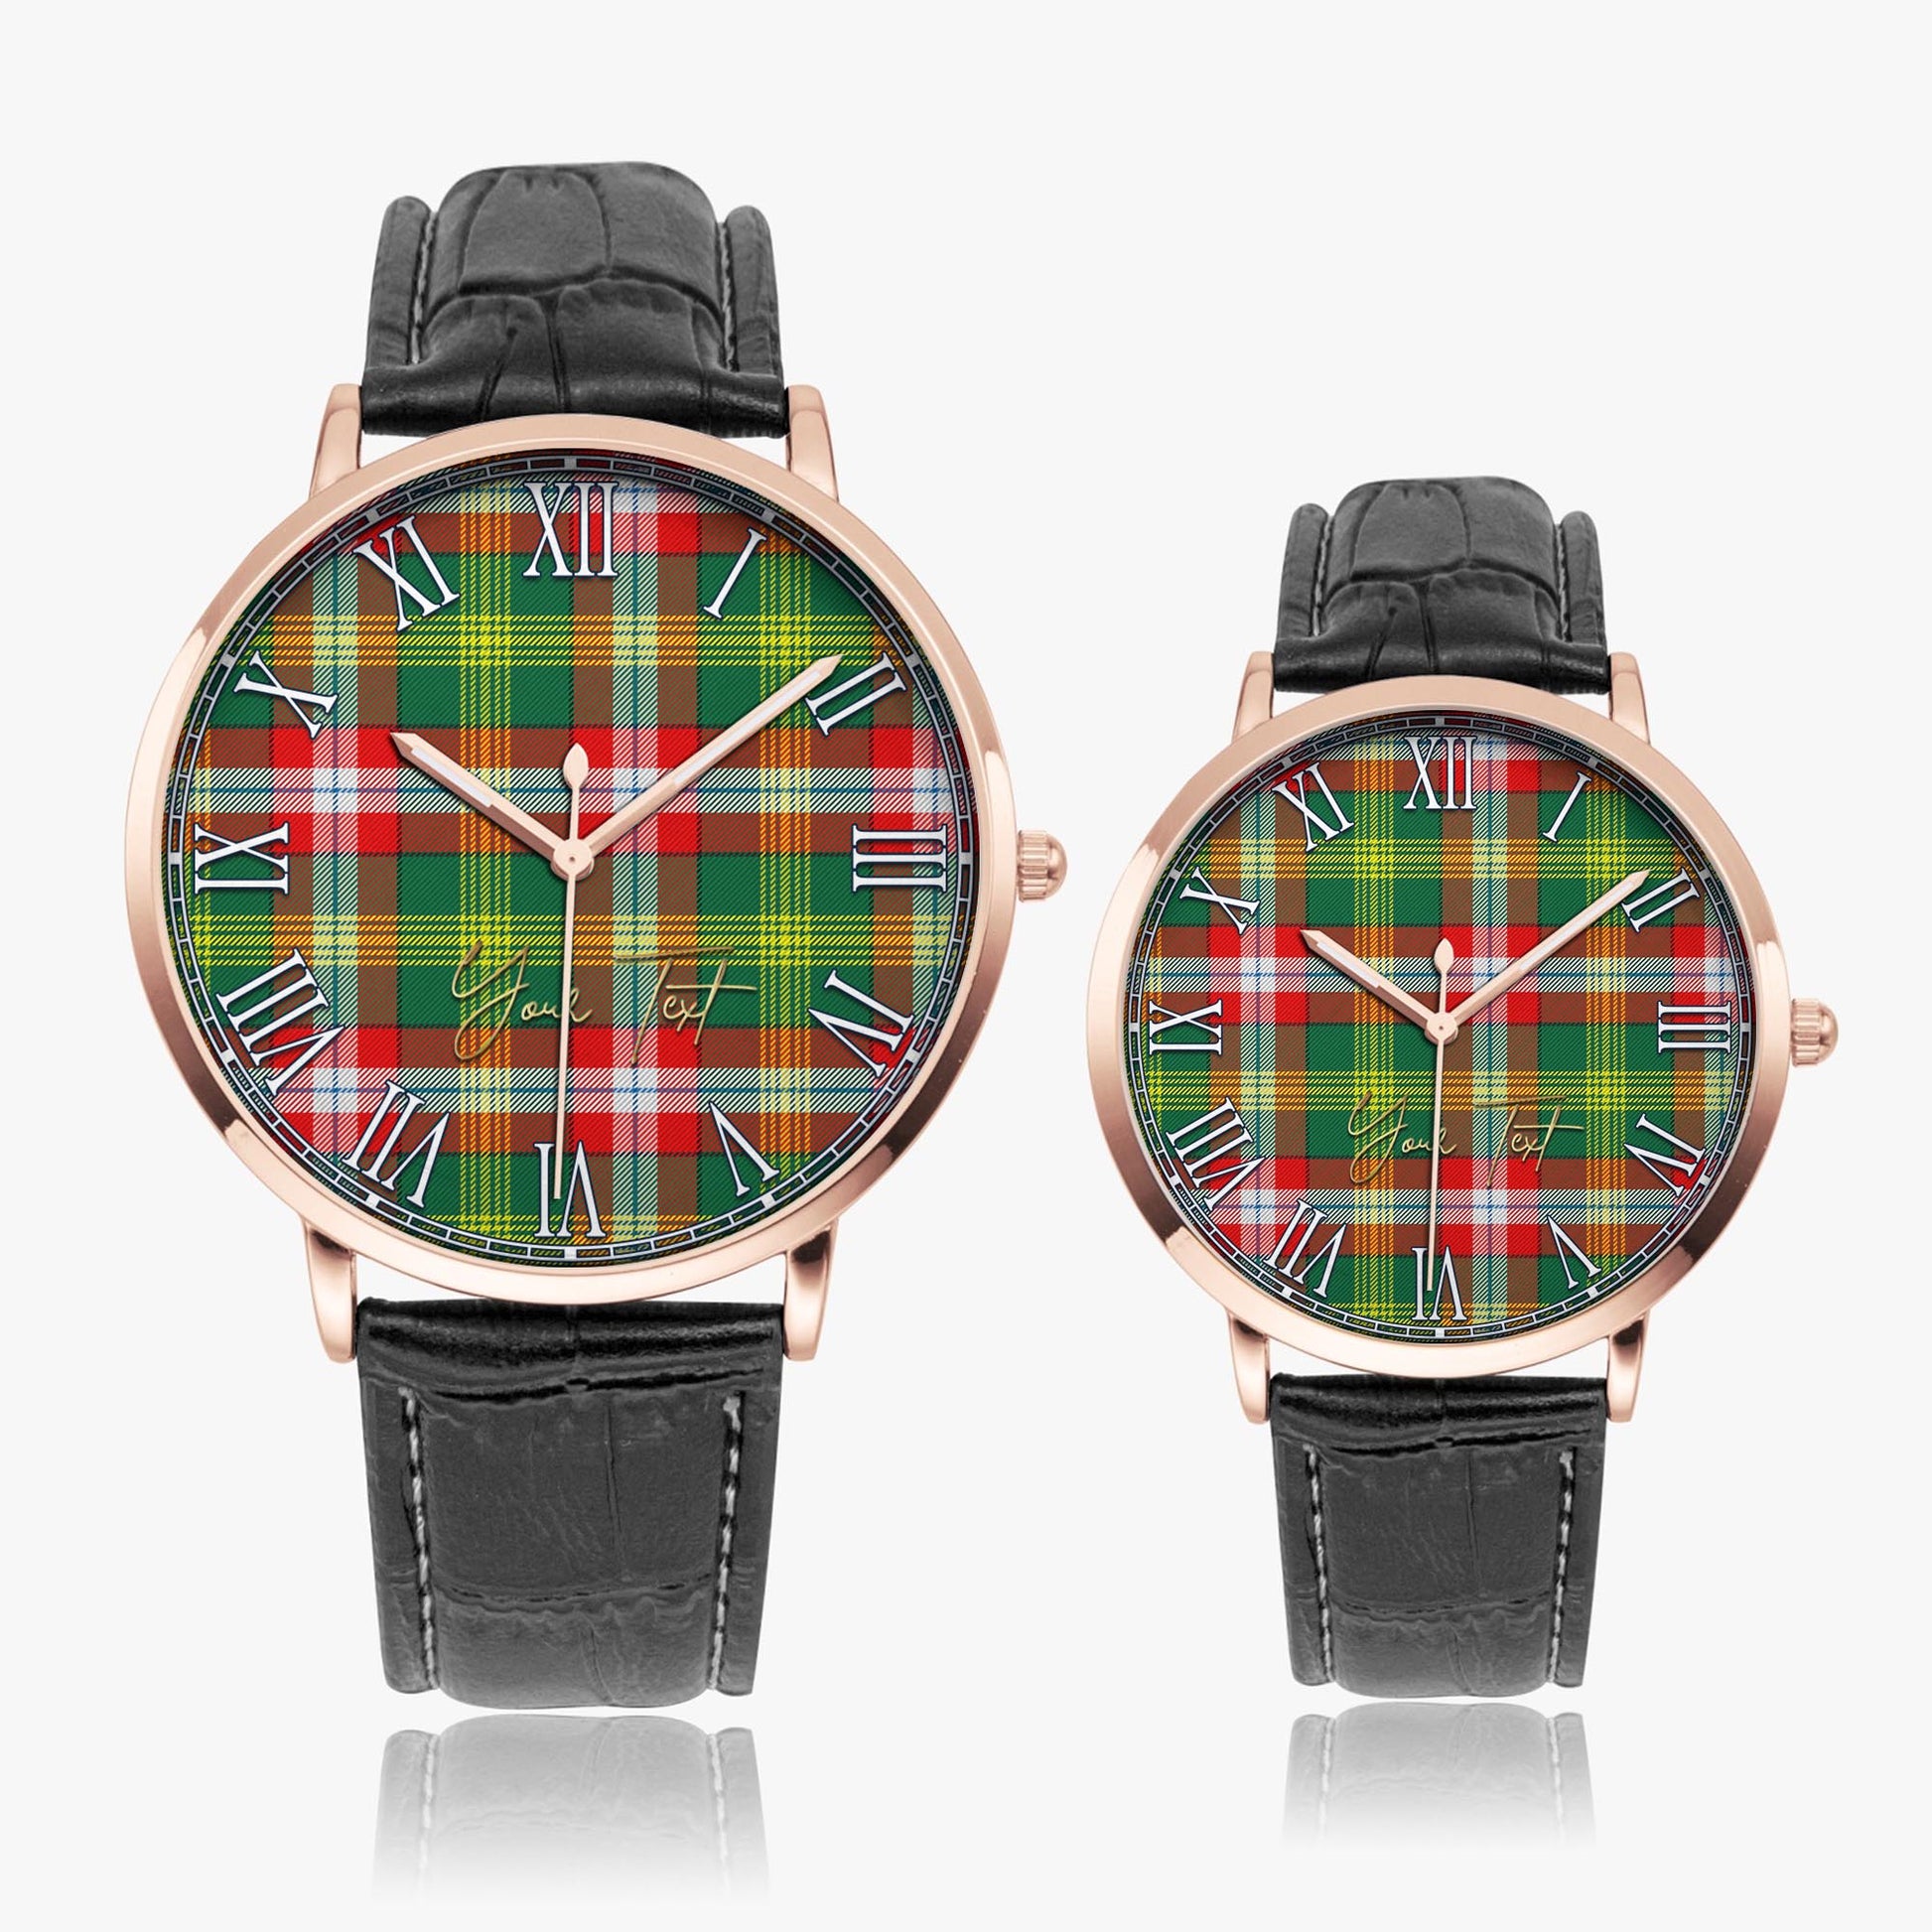 Northwest Territories Canada Tartan Personalized Your Text Leather Trap Quartz Watch Ultra Thin Rose Gold Case With Black Leather Strap - Tartanvibesclothing